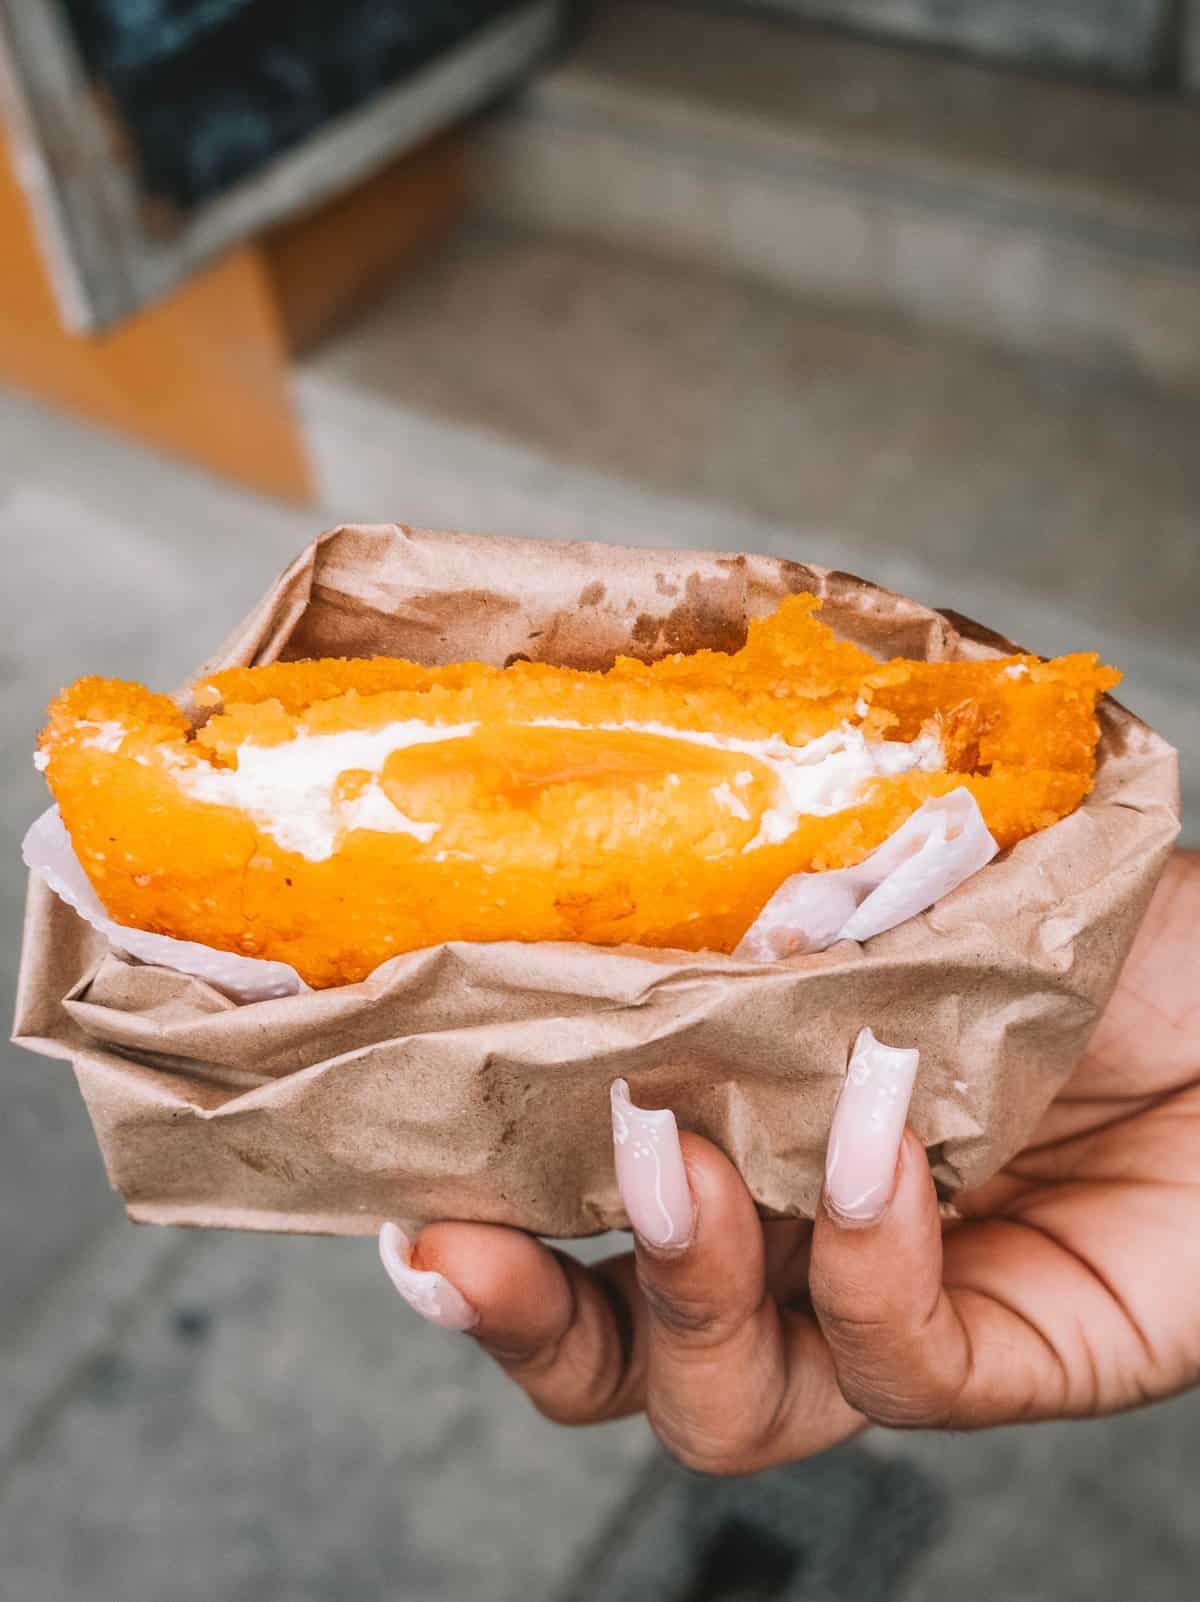 An arepa con huevo from Fritos la Mona that we tried on our street food tour—one of the best things to do in Cartagena.